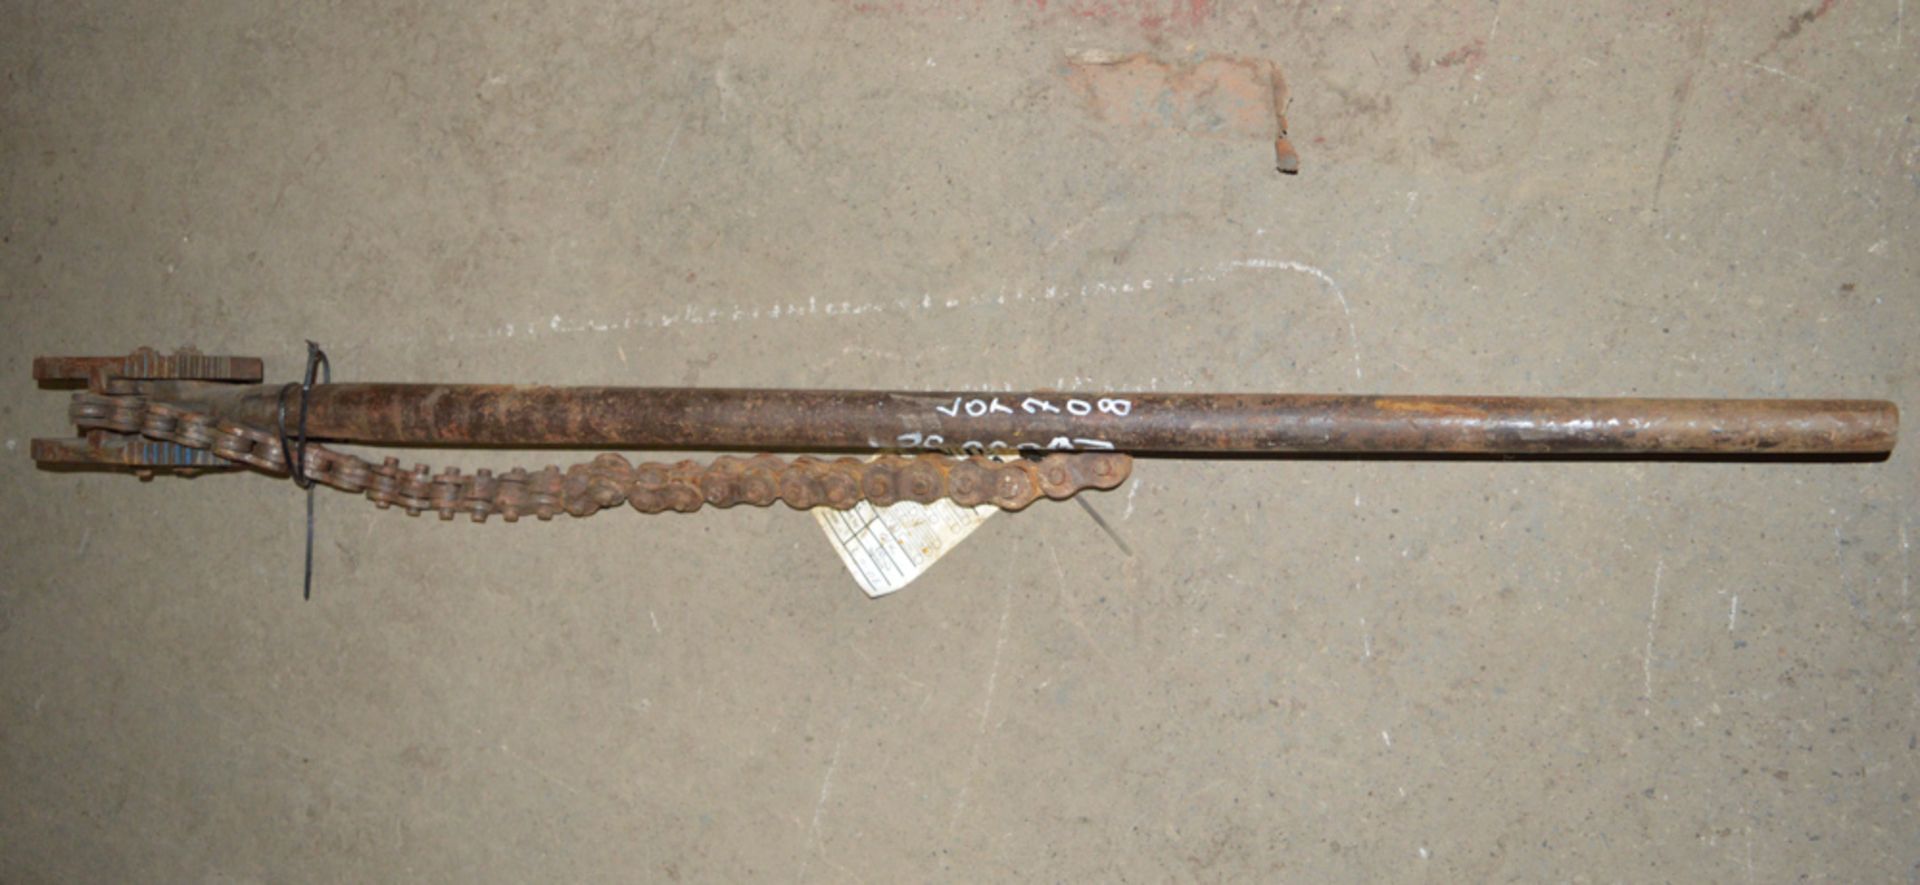 Pipe wrench E0000529